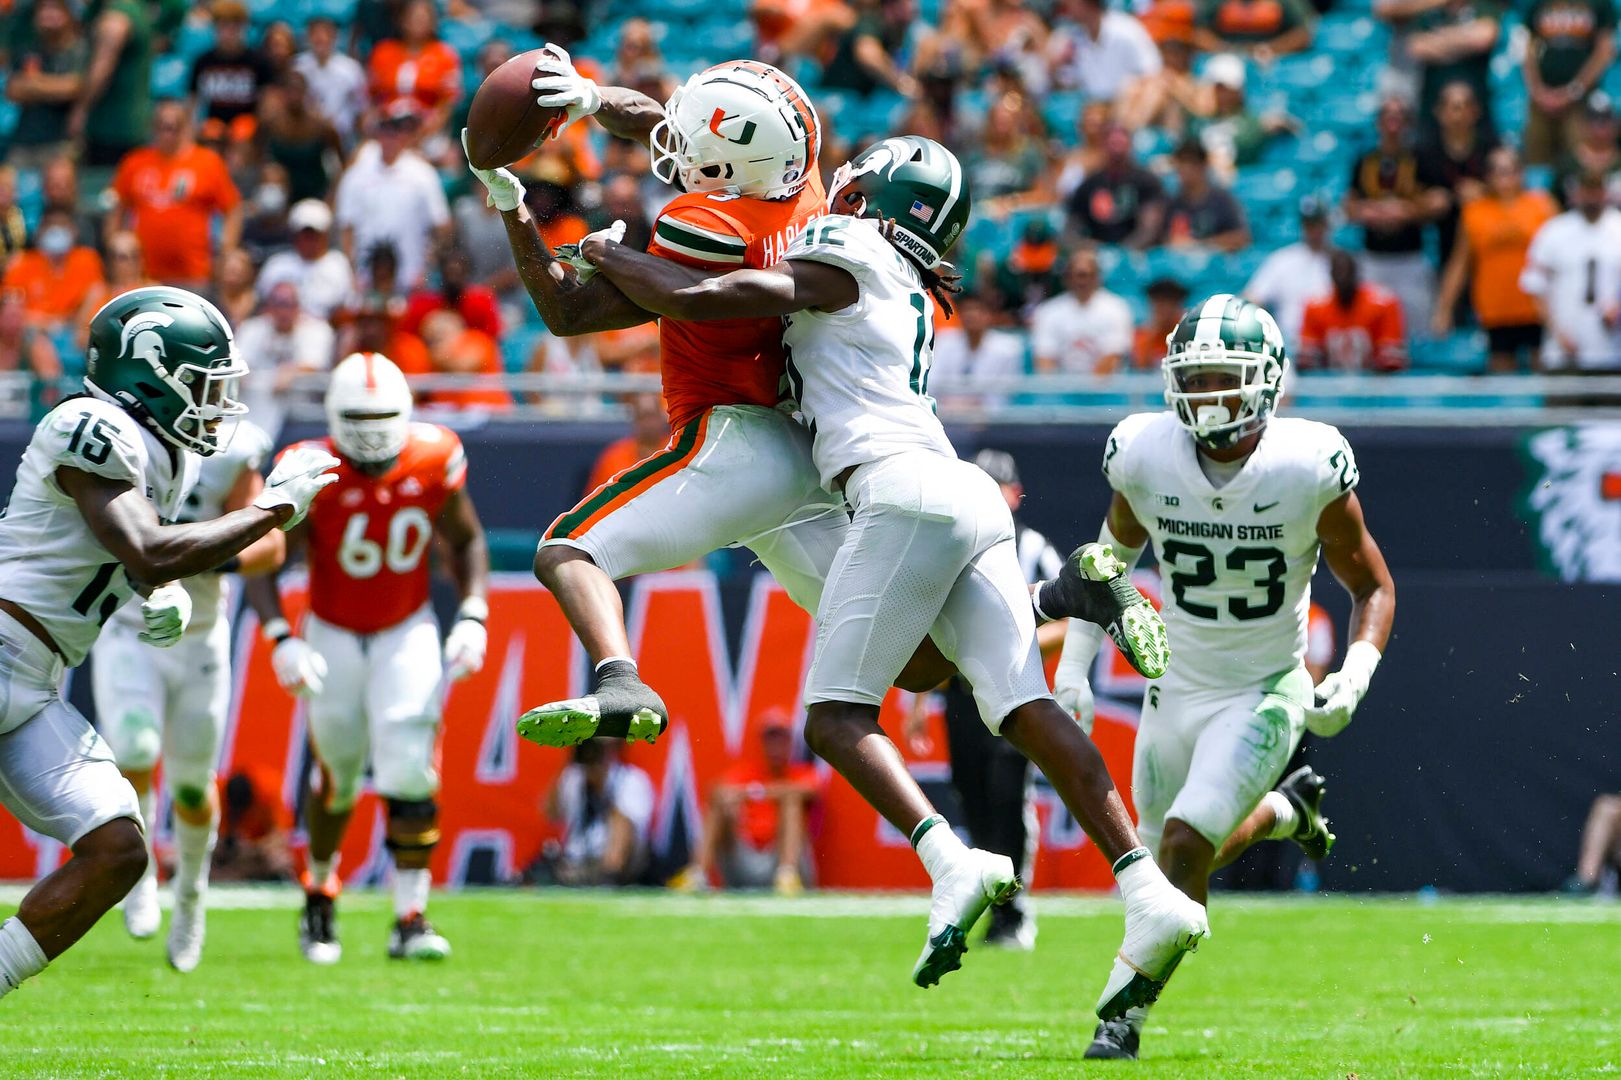 Photo Gallery: Canes Football vs Michigan State